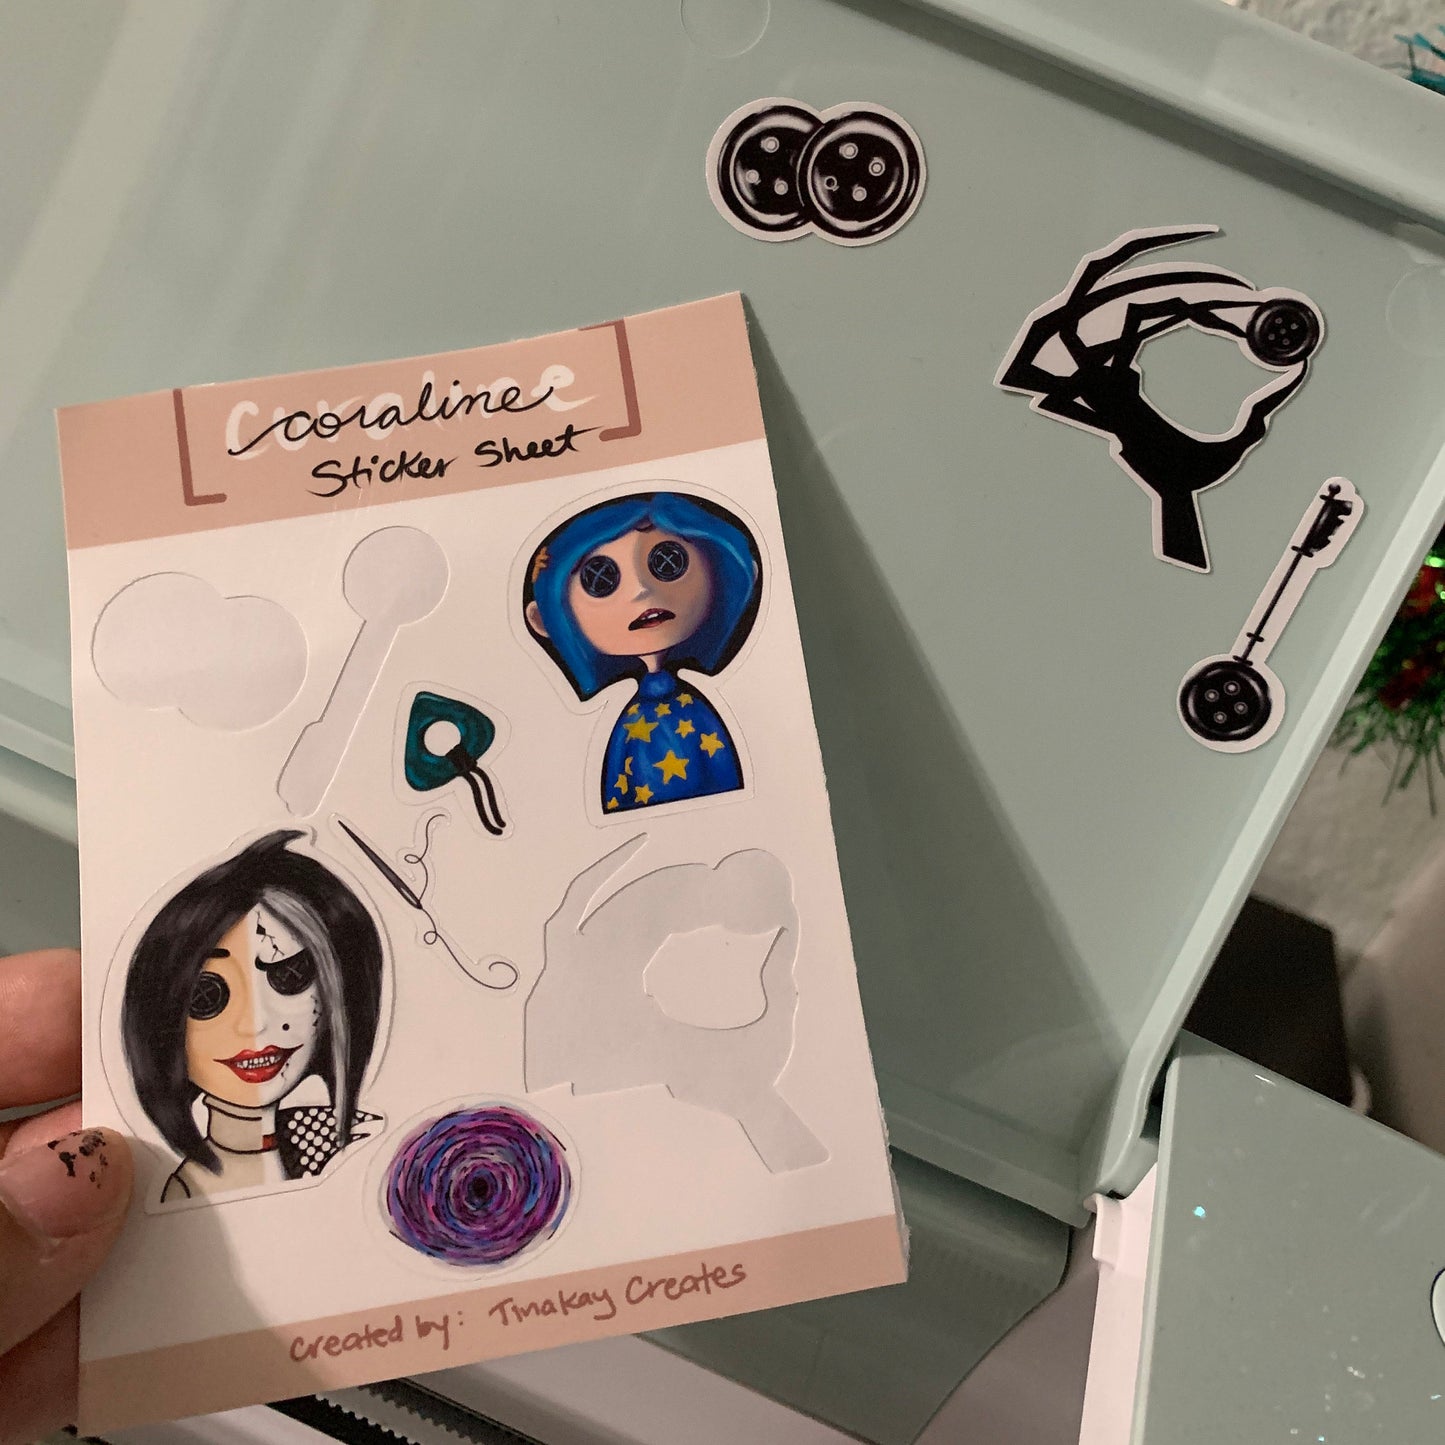 Coraline Other Mother Sticker Sheet Set of 8 - TinakayCreations